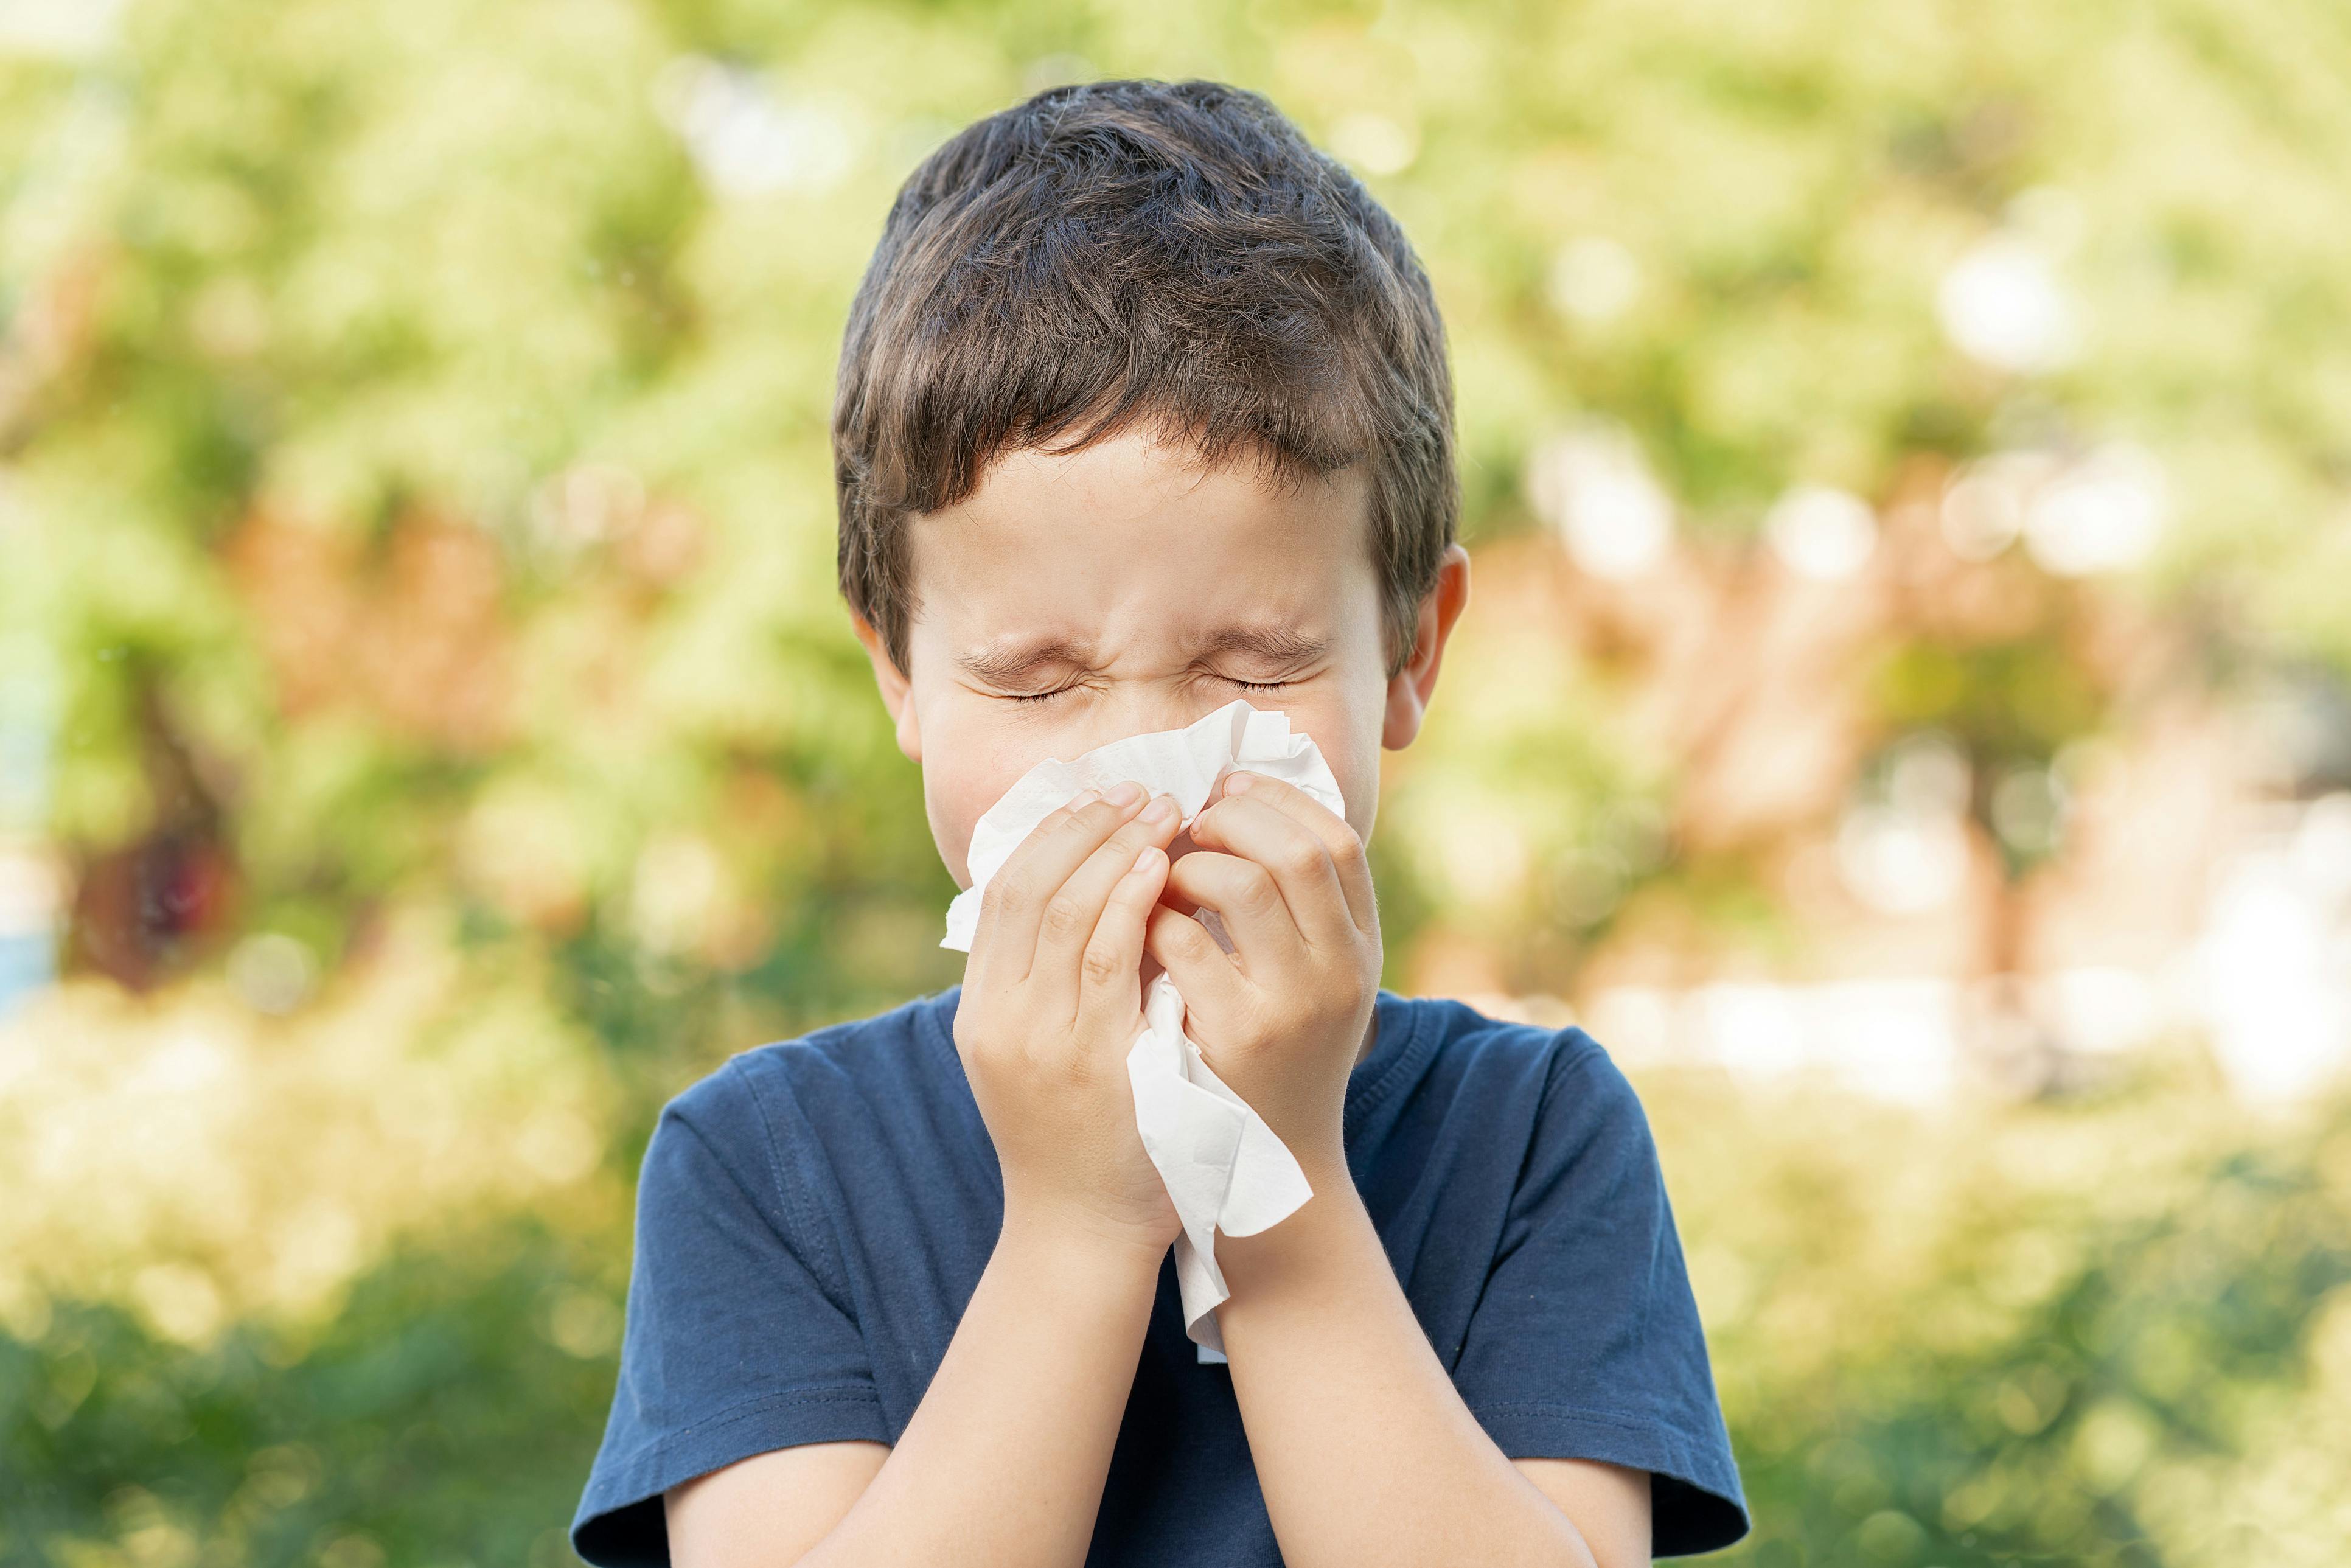 Child sneezing into a tissue outside